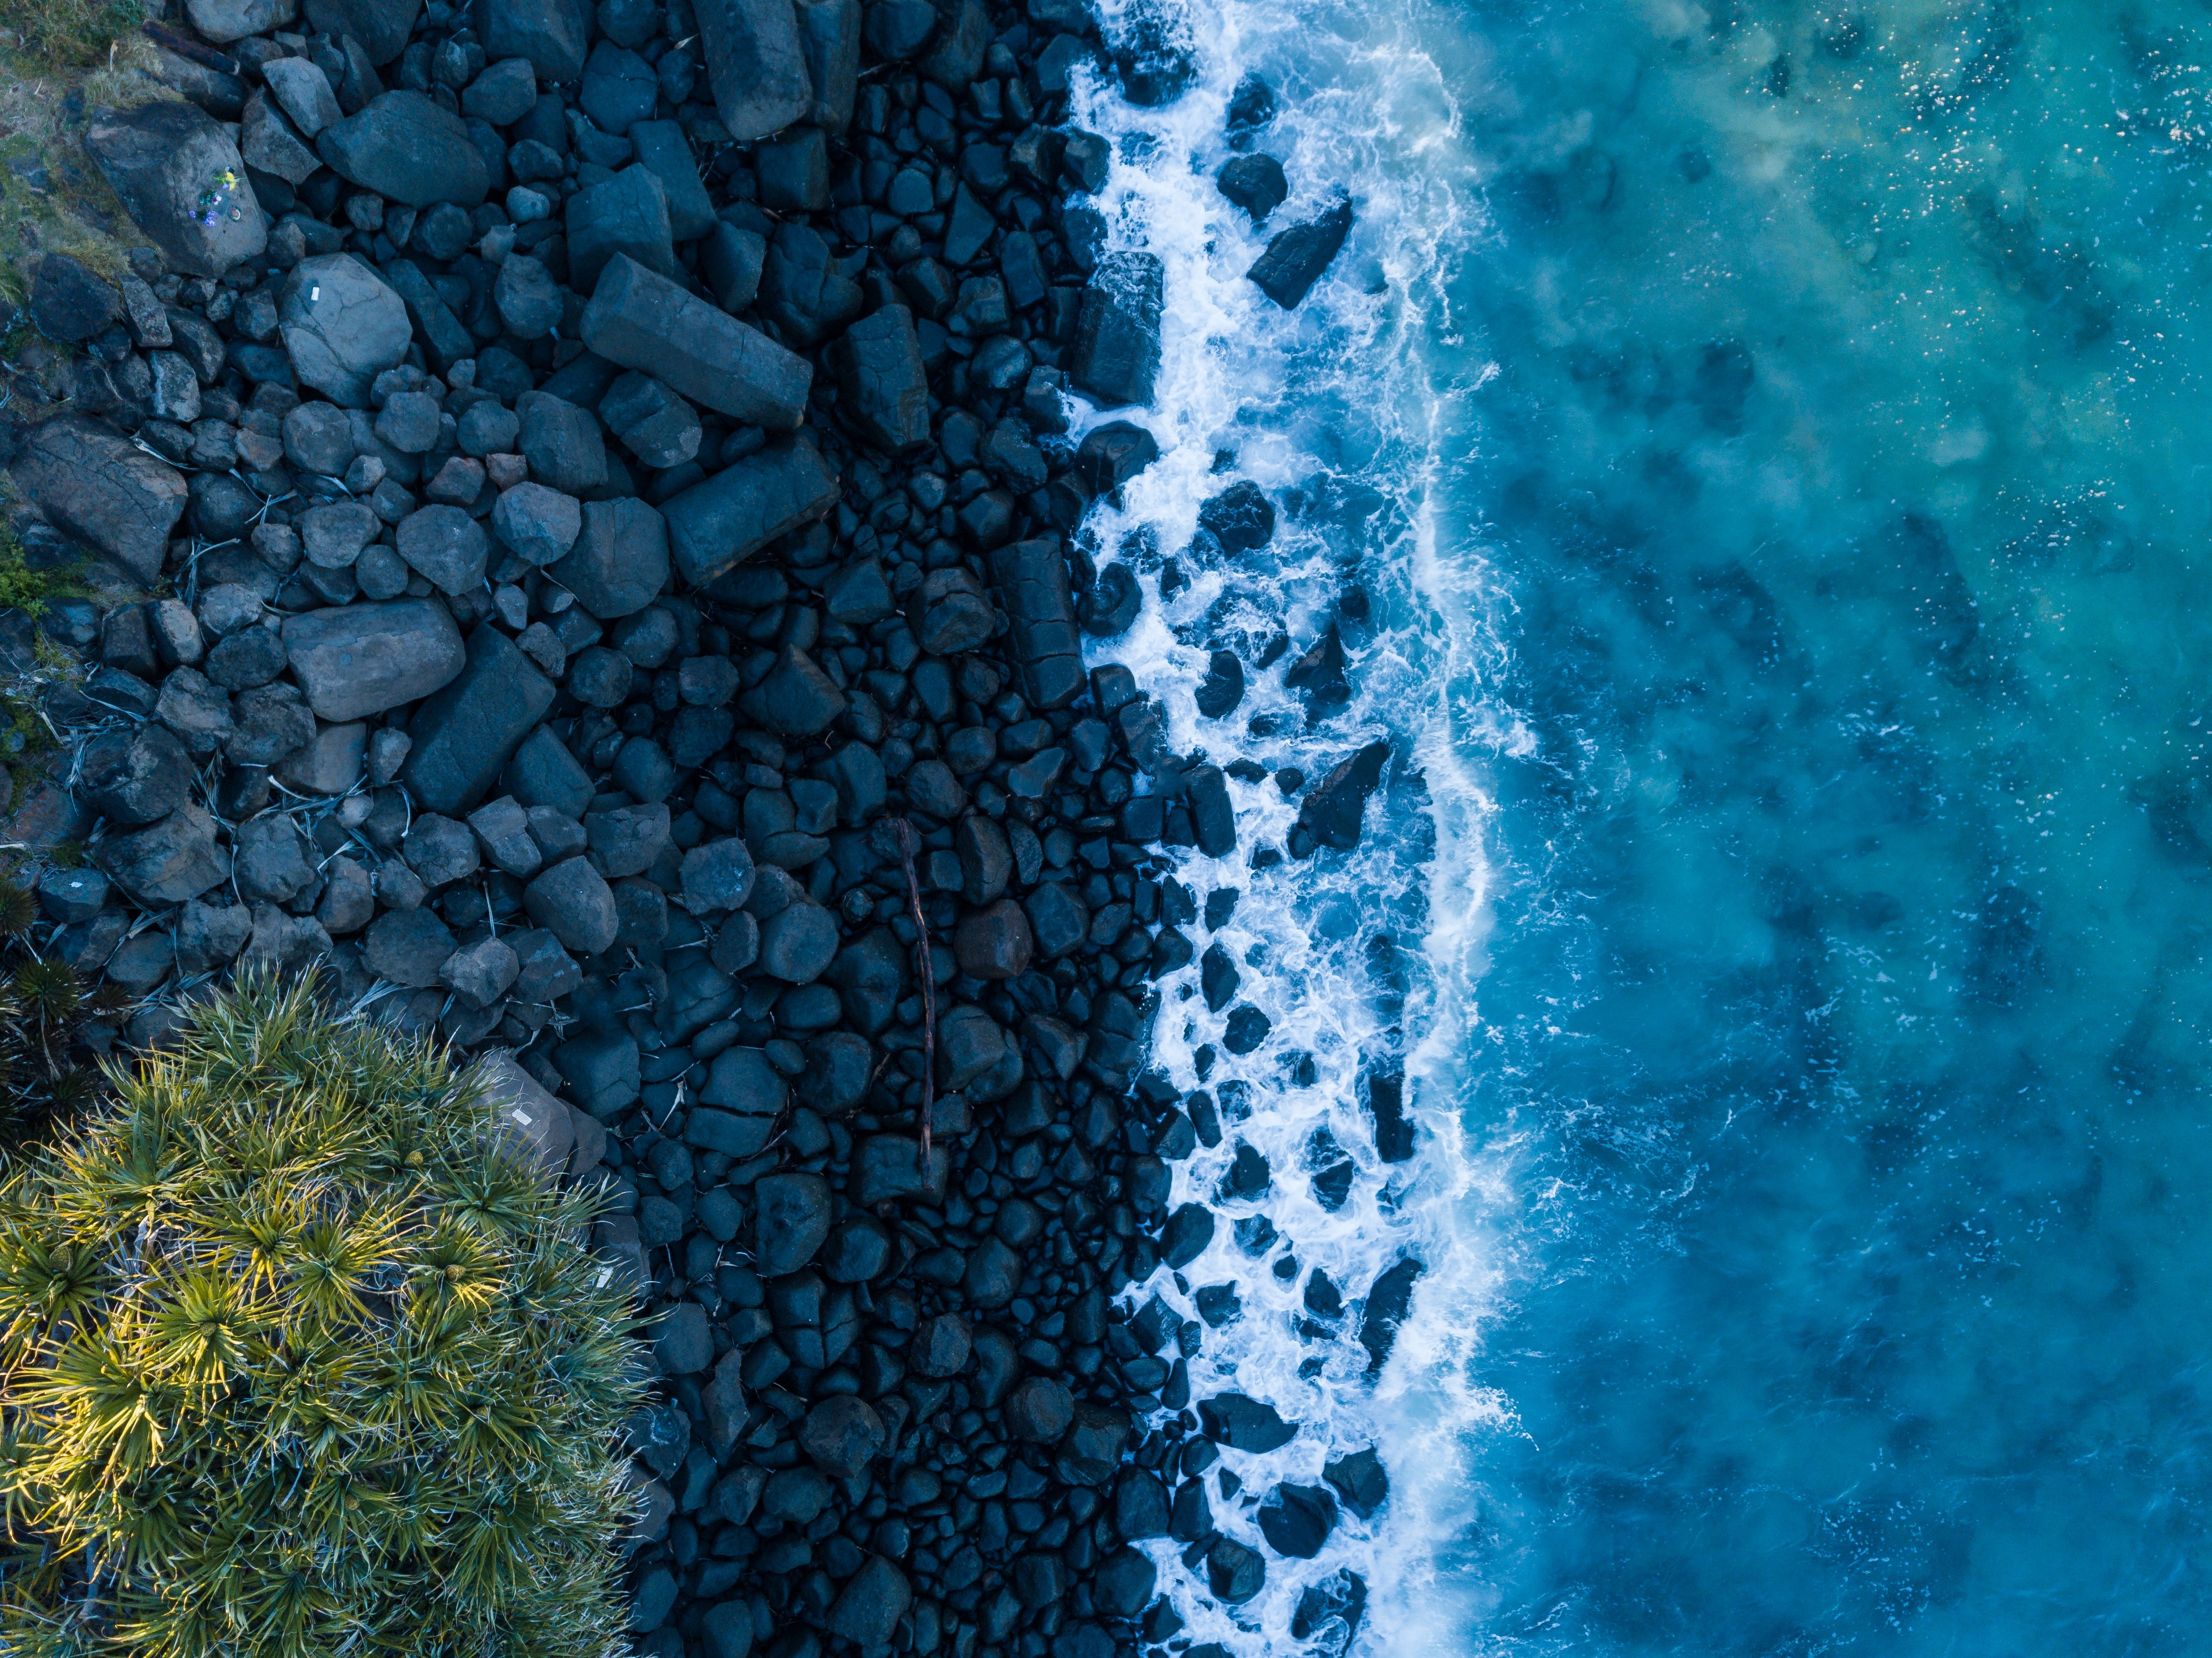 wallpapers view from above, nature, stones, shore, bank, ocean, surf